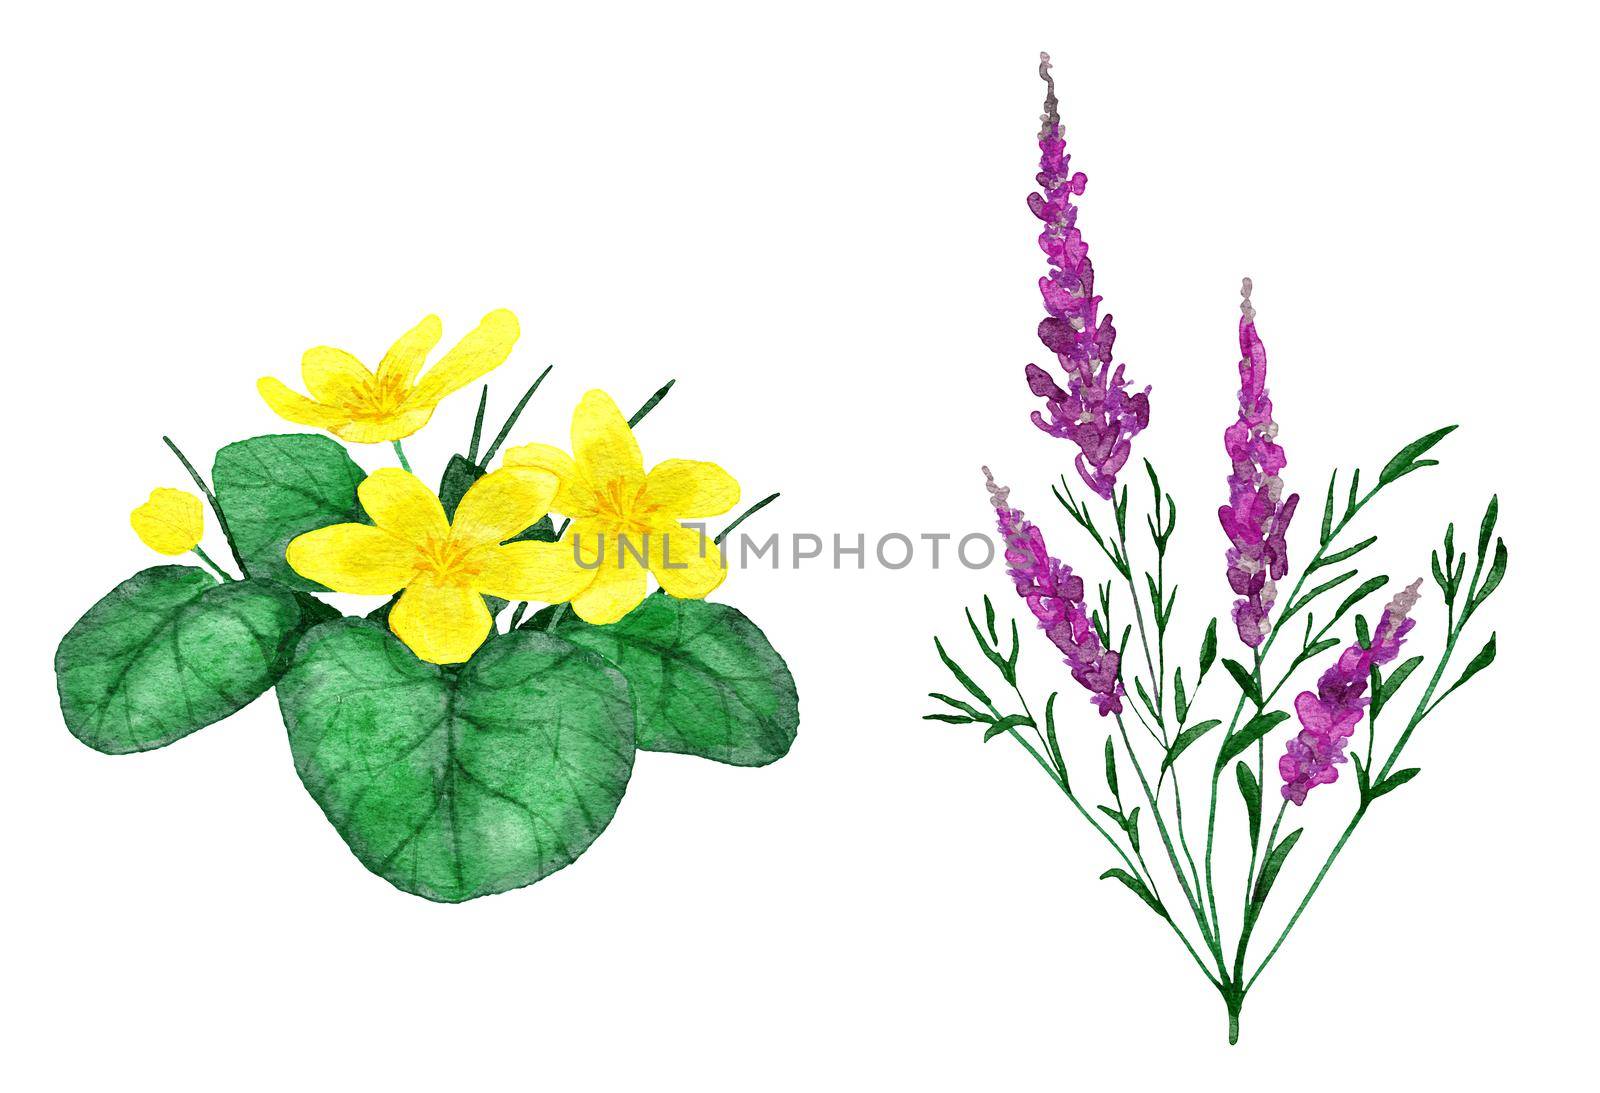 Watercolor hand drawn illustration of purple pink willowherb chamaenerion and yellow trollius flowers. Floral natural wildflower river lake forest landscape. Organic bloom leaf leaves plants herbs. by Lagmar